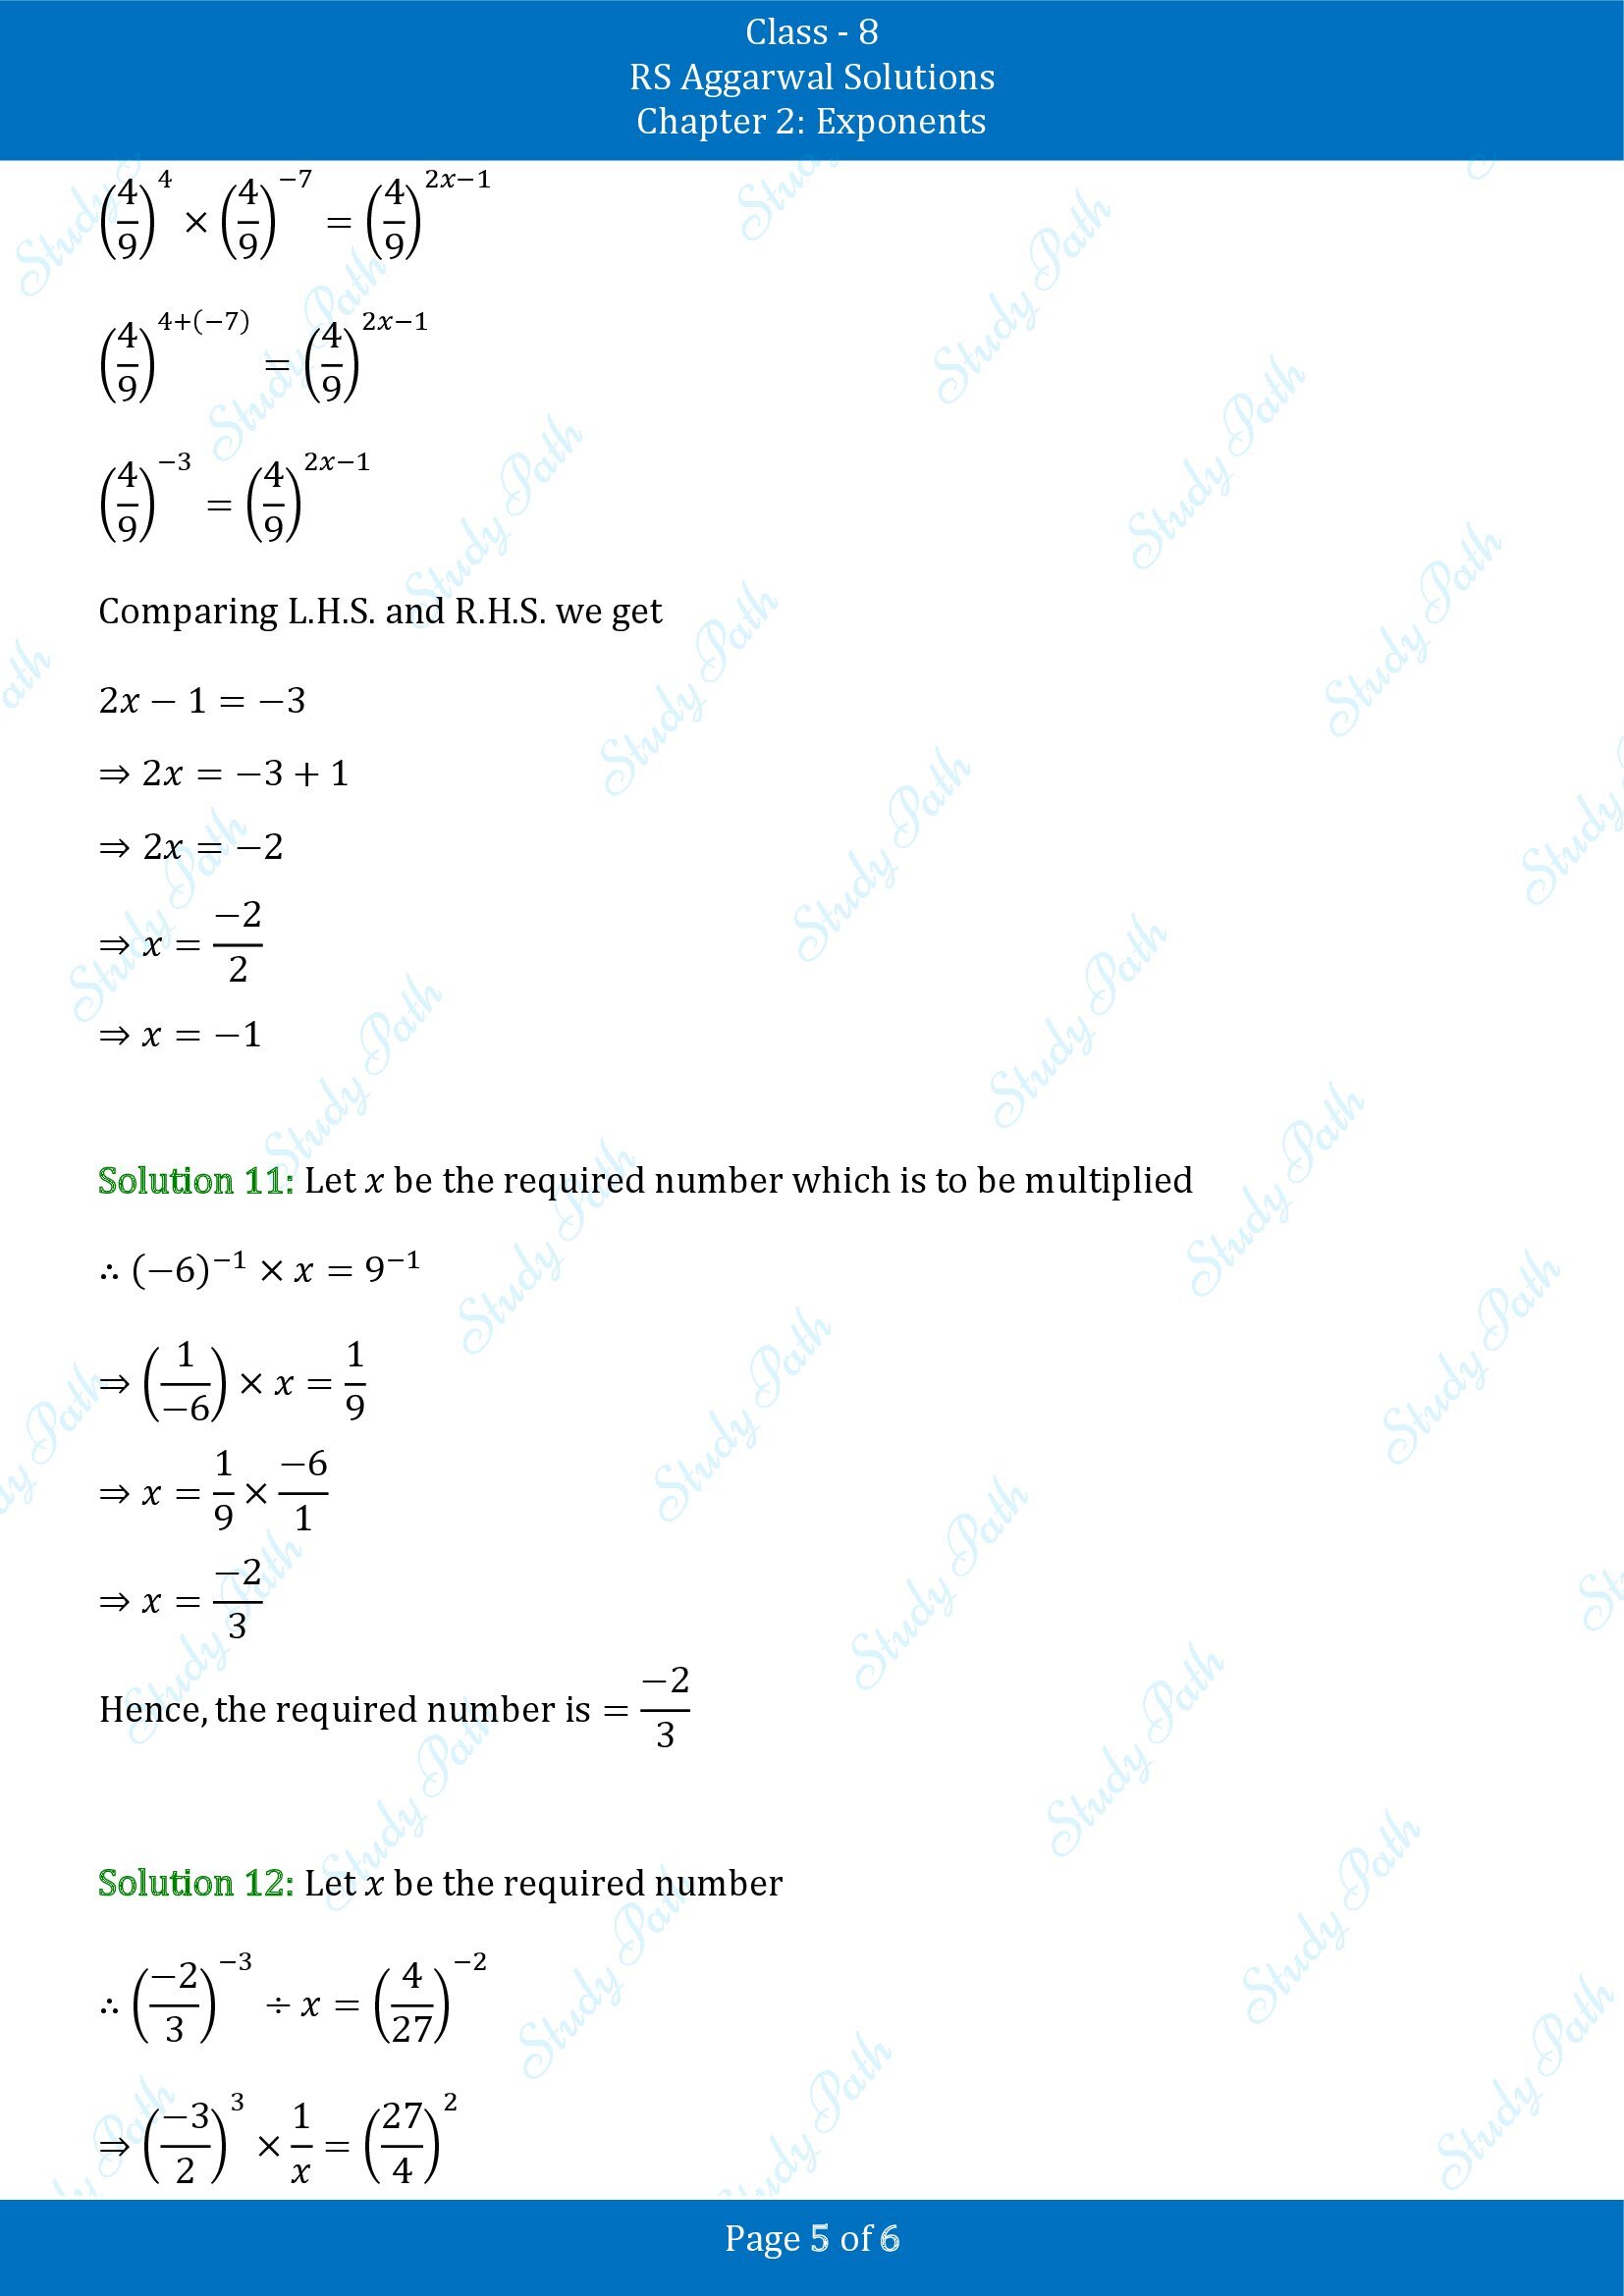 RS Aggarwal Solutions Class 8 Chapter 2 Exponents Exercise 2A 00005